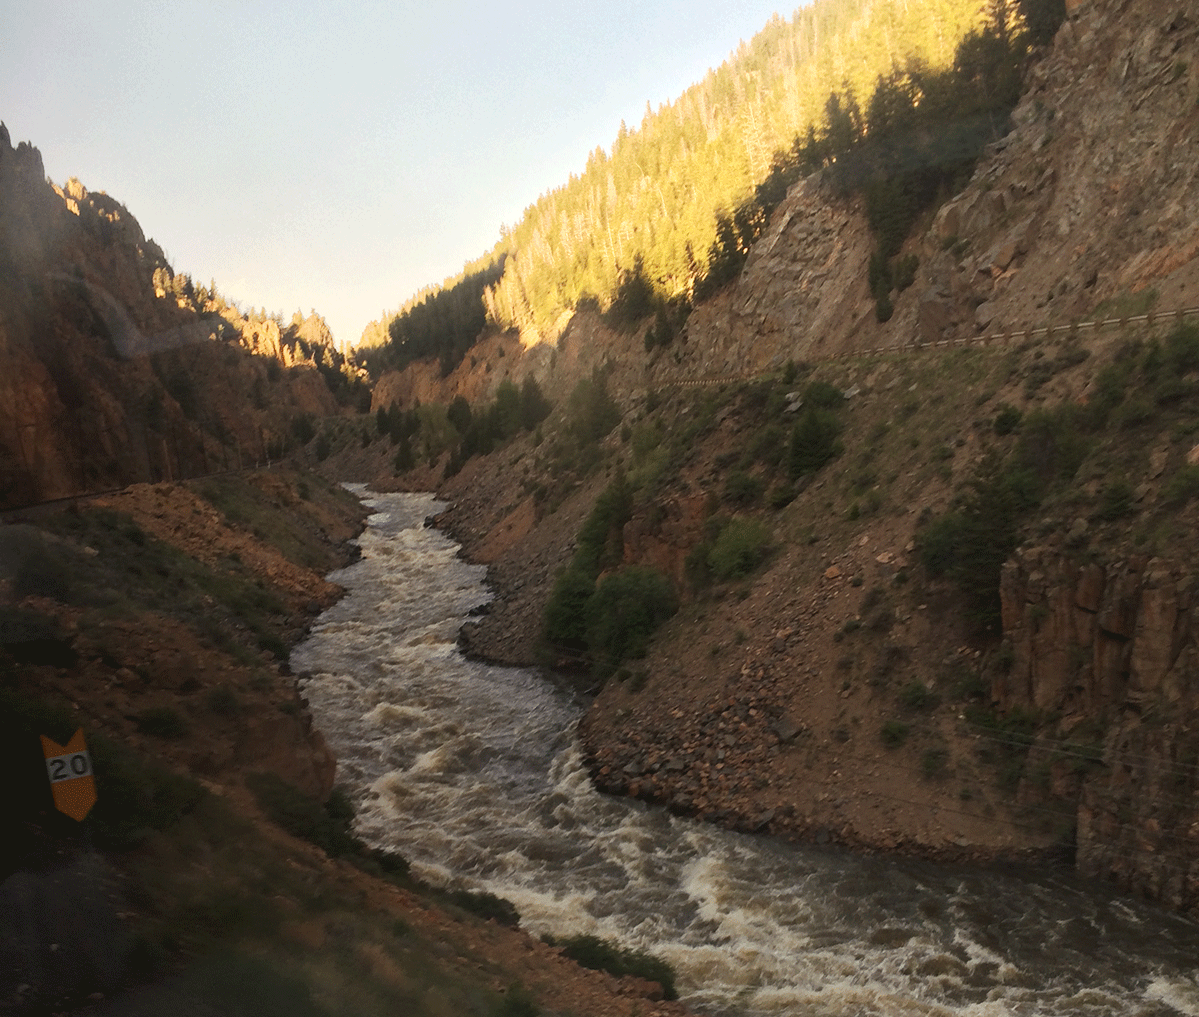 View of Colorado looking out Amtrak train